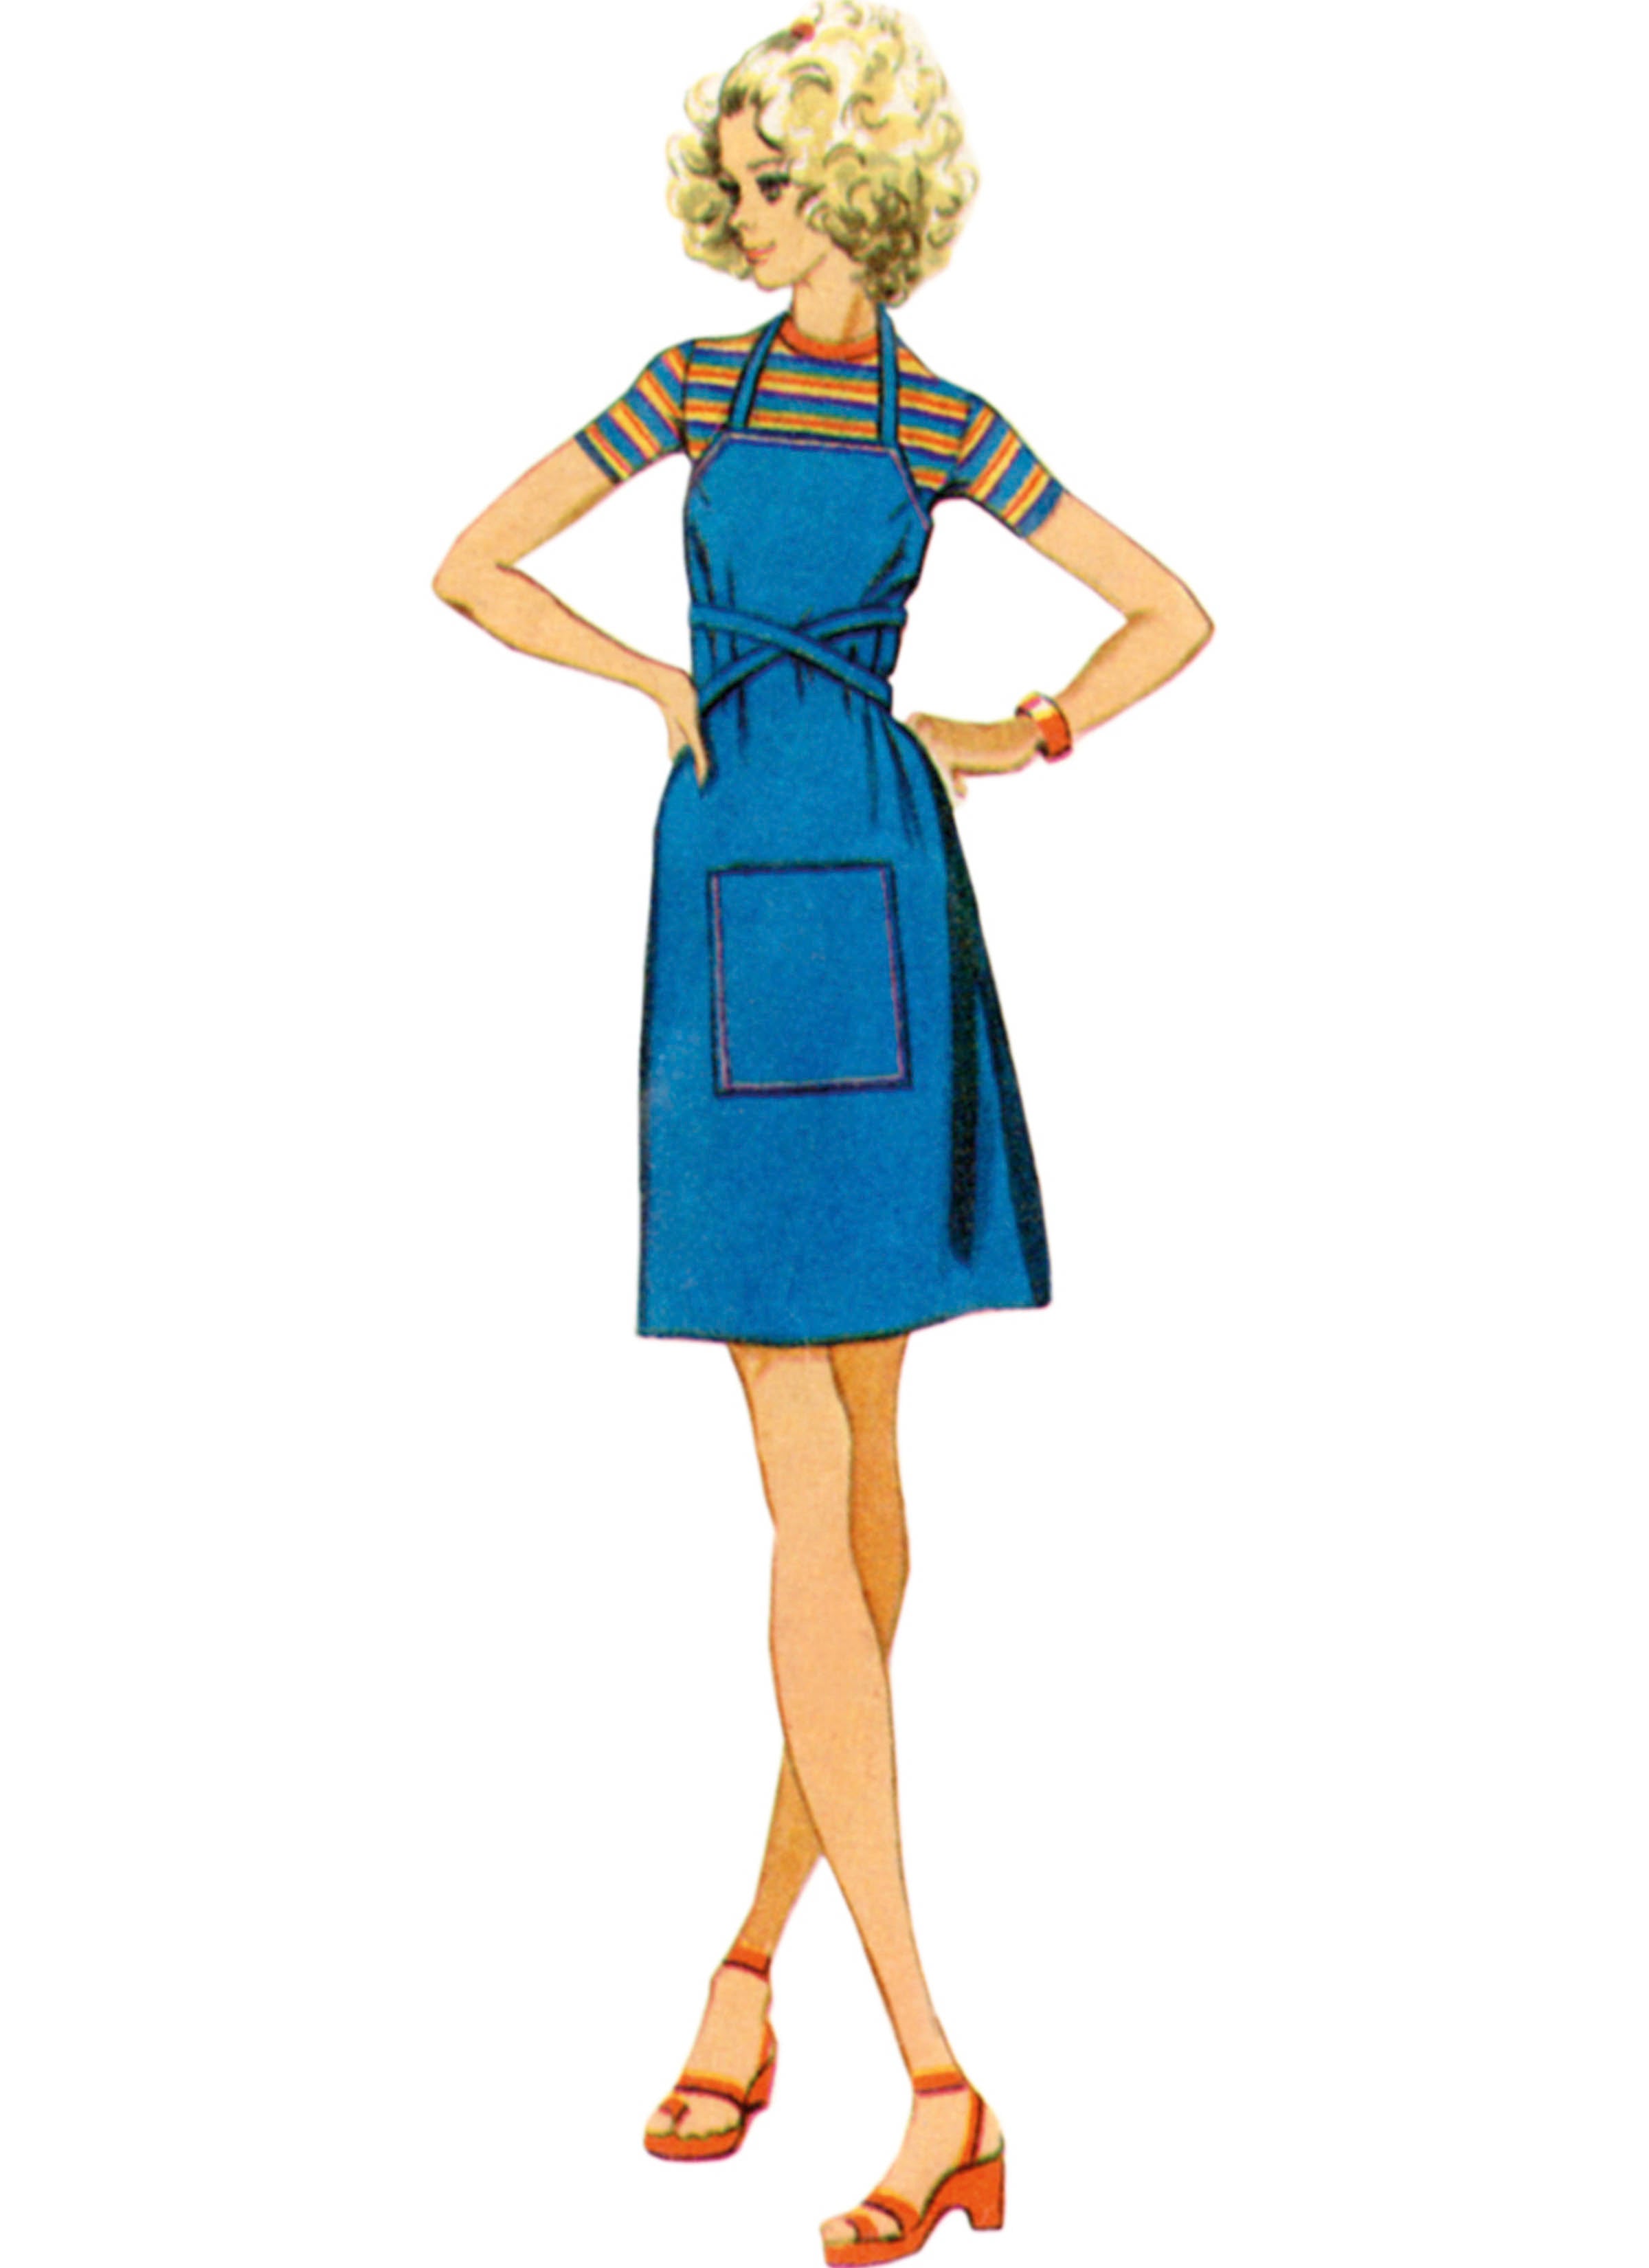 Simplicity 9739 sewing pattern Misses' Back-Wrap Dress and Jumper from Jaycotts Sewing Supplies